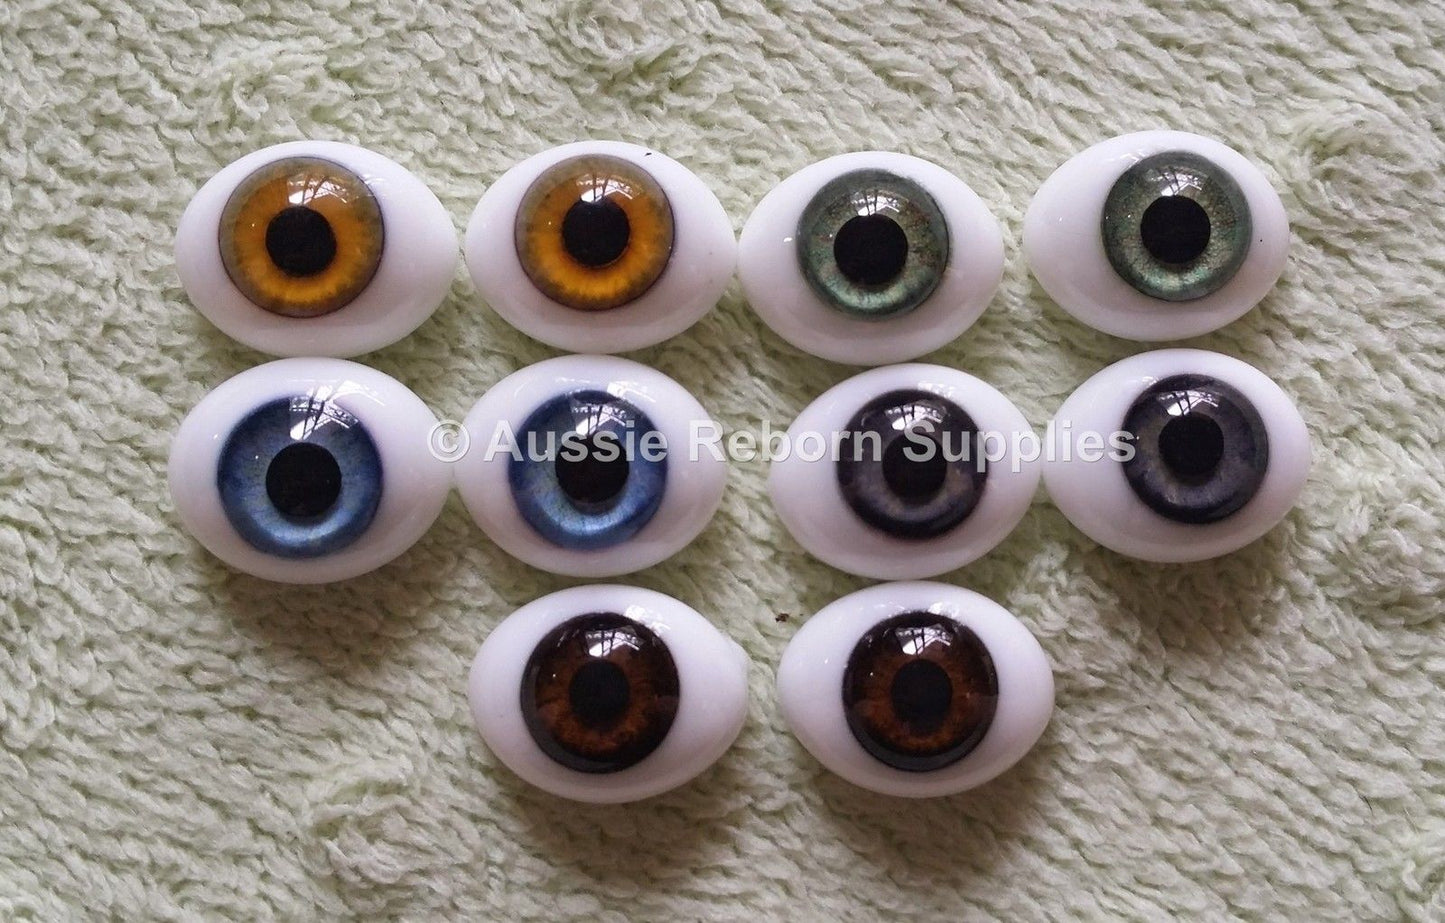 20mm Brown Oval Glass Eye Reborn Baby Doll Making Supplies